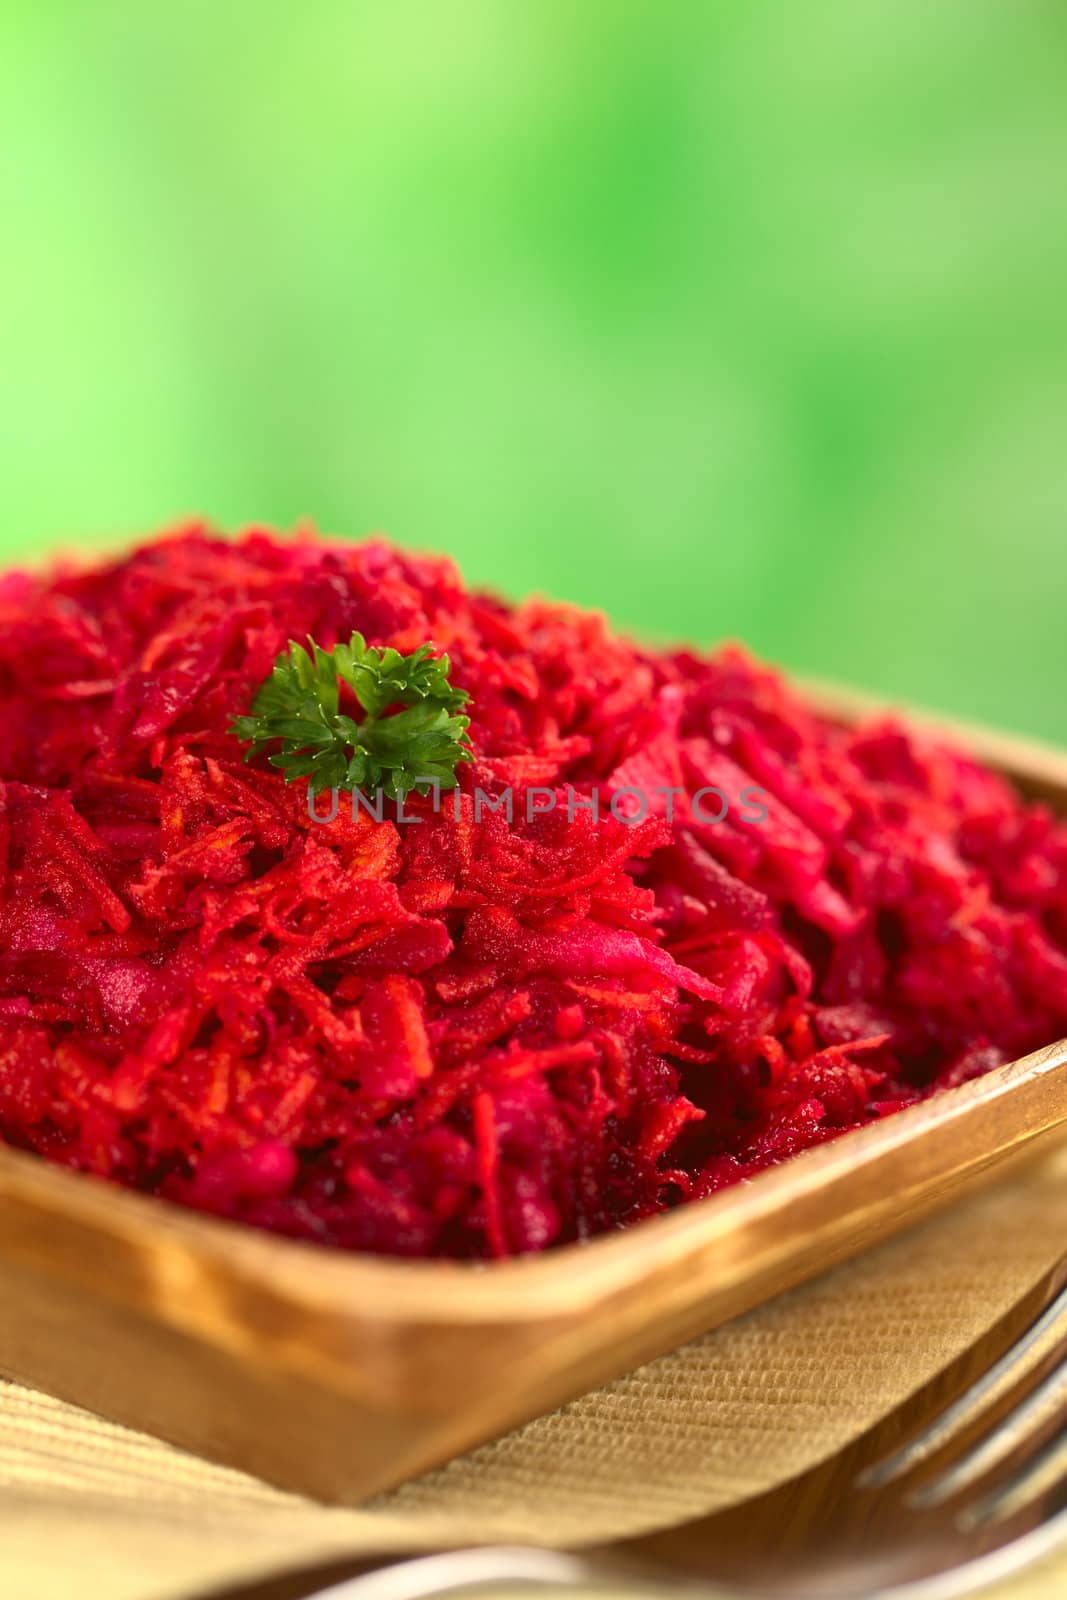 Fresh grated beetroot, carrot and apple salad garnished with a parsley leaf (Selective Focus, Focus on the front of the parsley leaf)